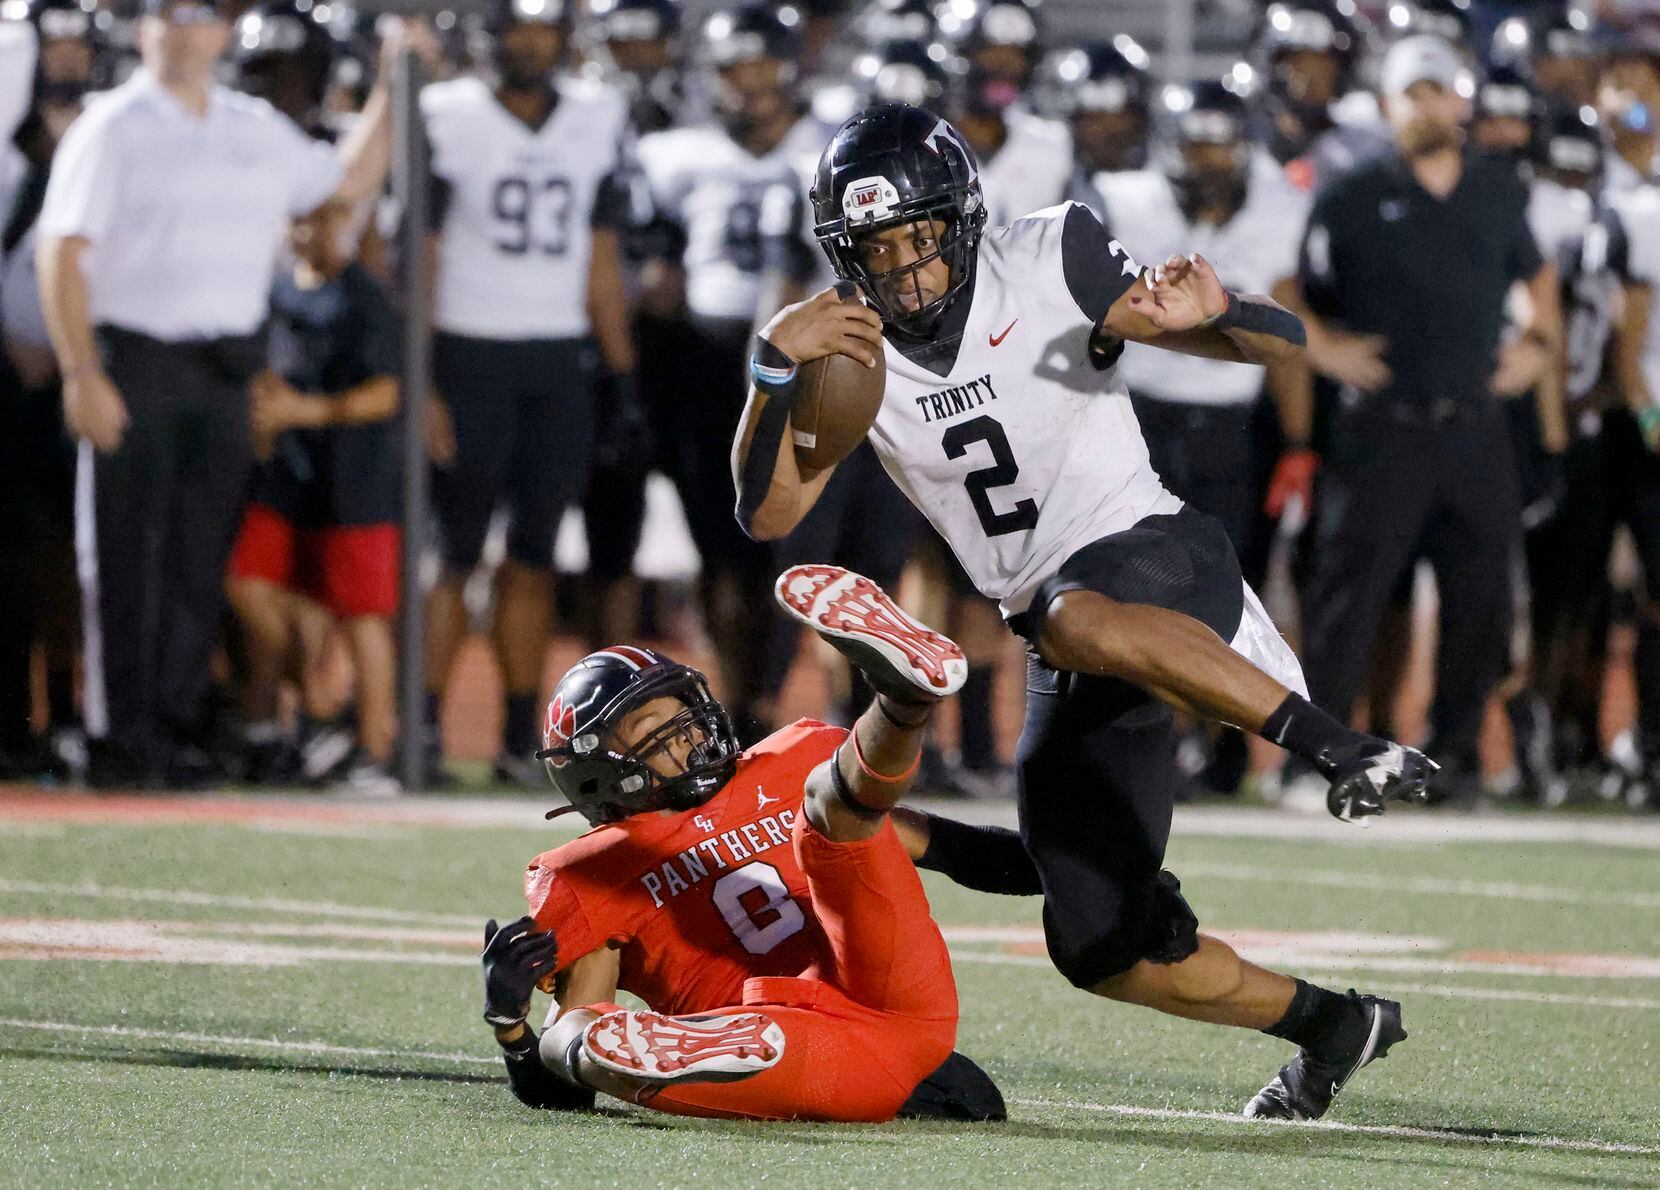 Euless Trinity quarterback Ollie Gordon (2) runs for yardage as he is defended by Colleyville Heritage player Dylahn McKinney (8) during the first half of a high school football game in Grapevine, Texas on Friday, Sept. 10, 2021. (Michael Ainsworth/Special Contributor)